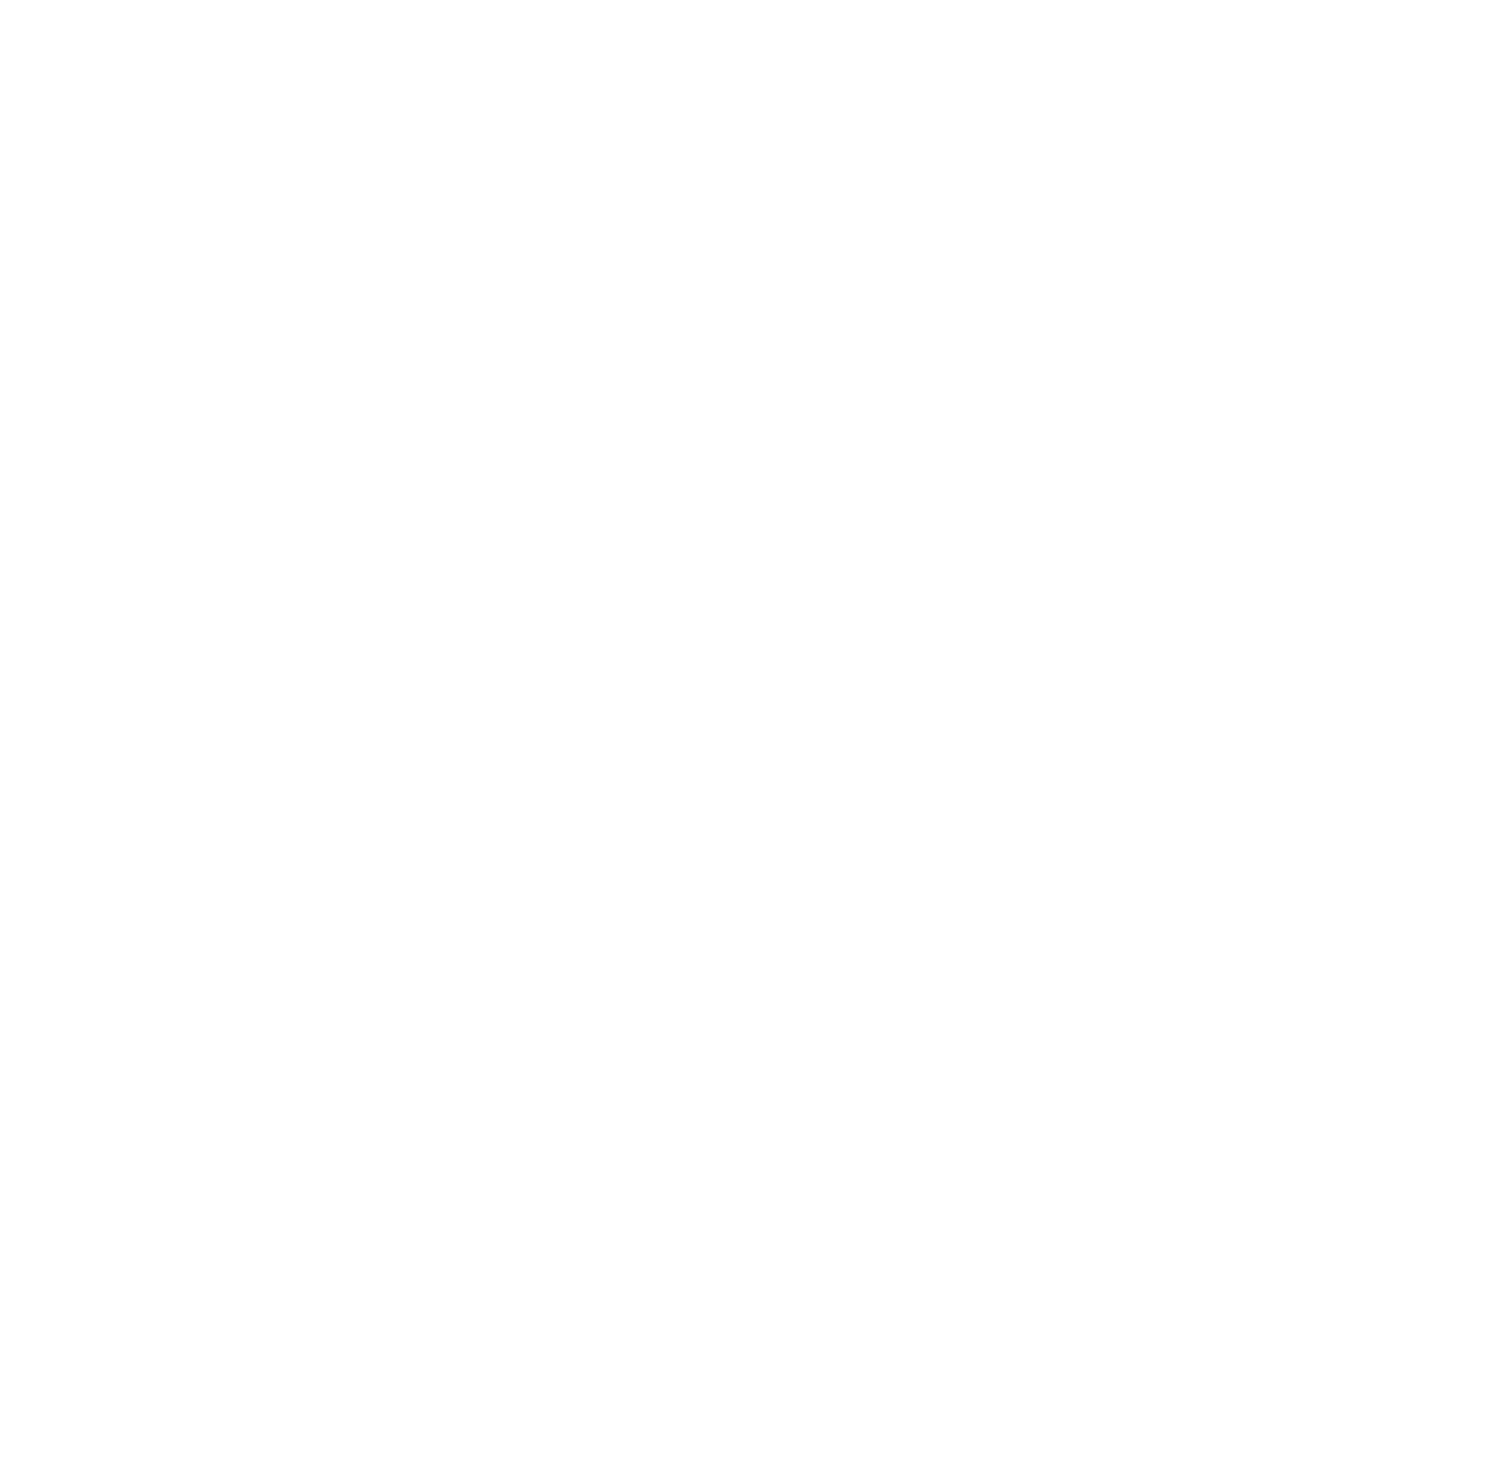 Boost Yourself Consulting